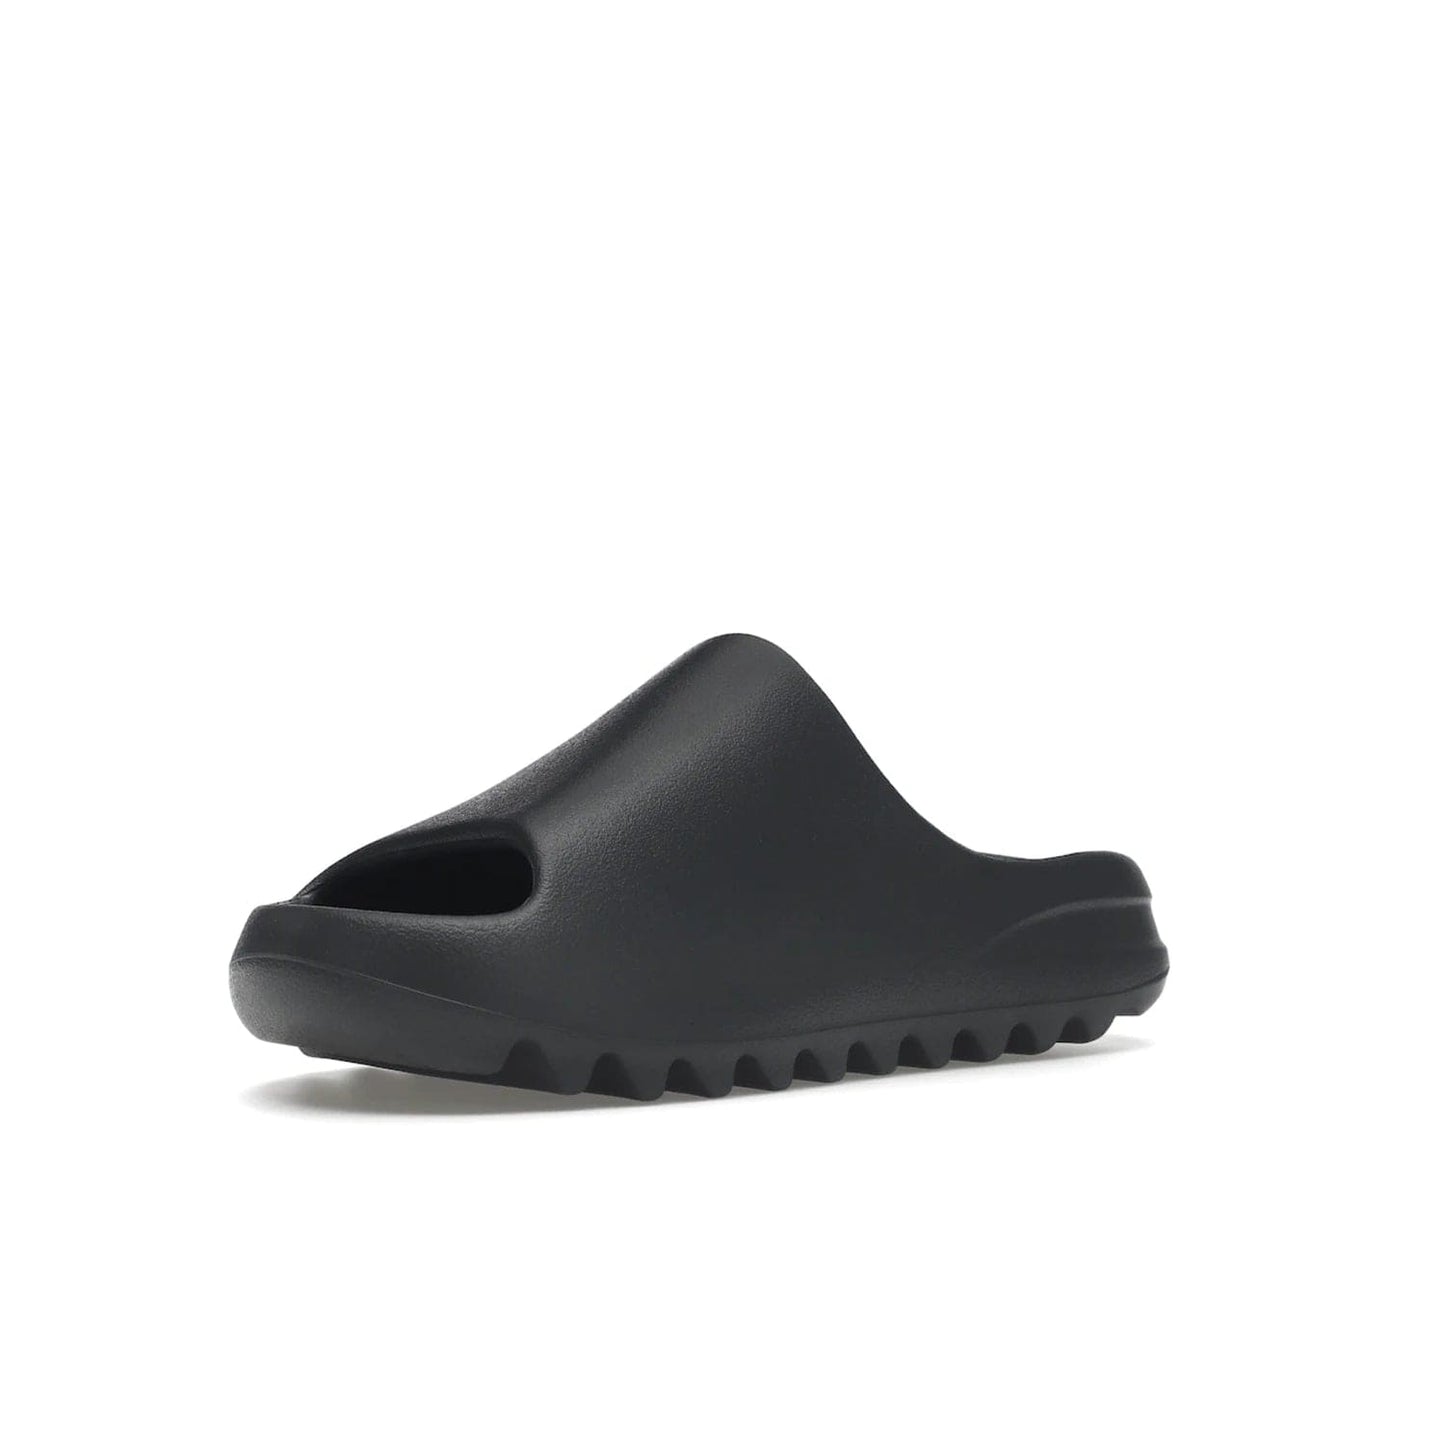 adidas Yeezy Slide Slate Grey - Image 15 - Only at www.BallersClubKickz.com - Stylish & comfortable adidas Yeezy Slide Slate Grey features an EVA foam upper, strategic cutouts, textured outsole pattern, & easy slip-on design for modern comfort & classic style.